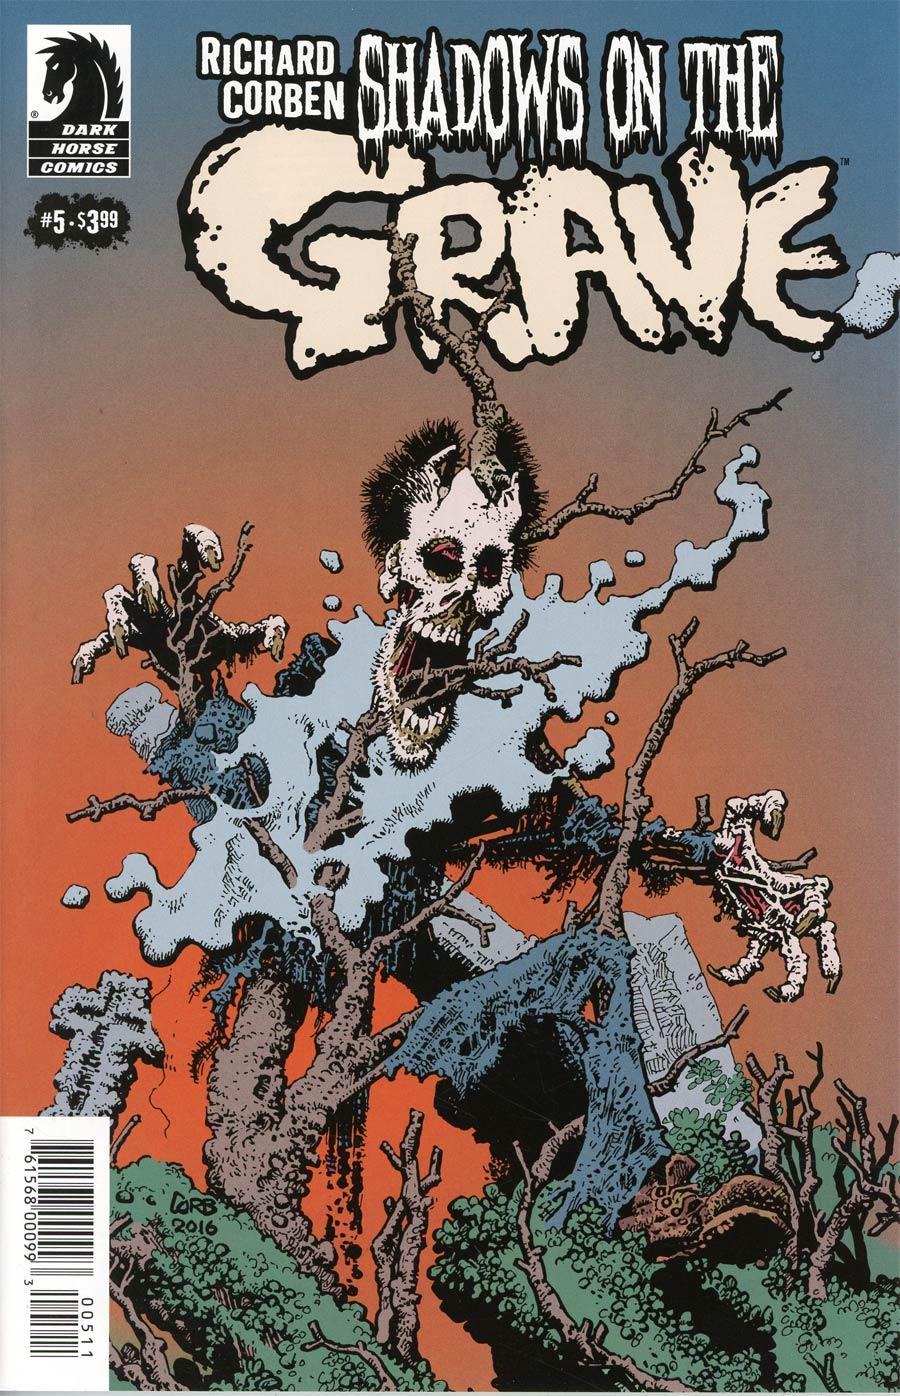 Shadows On The Grave Vol. 1 #5